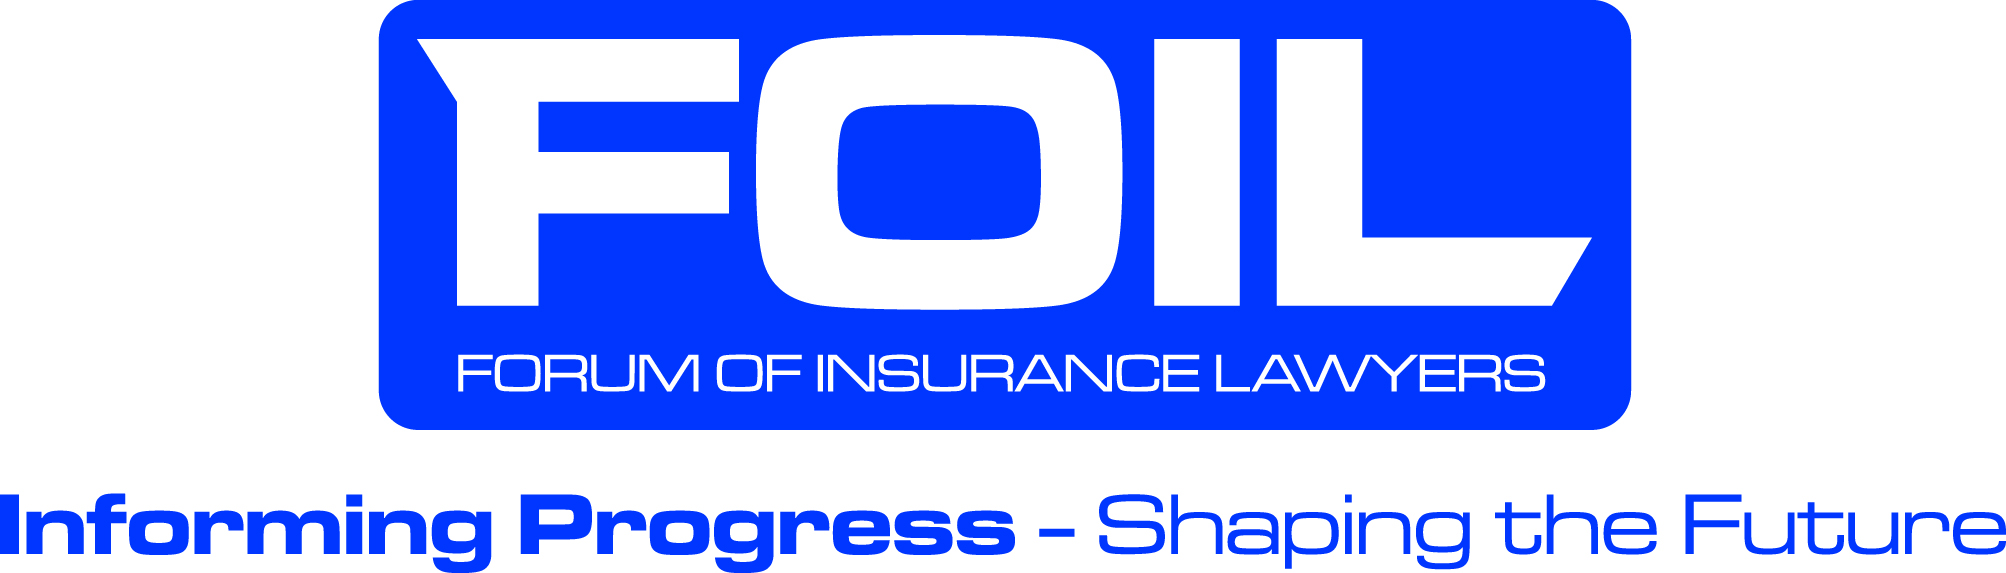 Forum of Insurance Lawyers